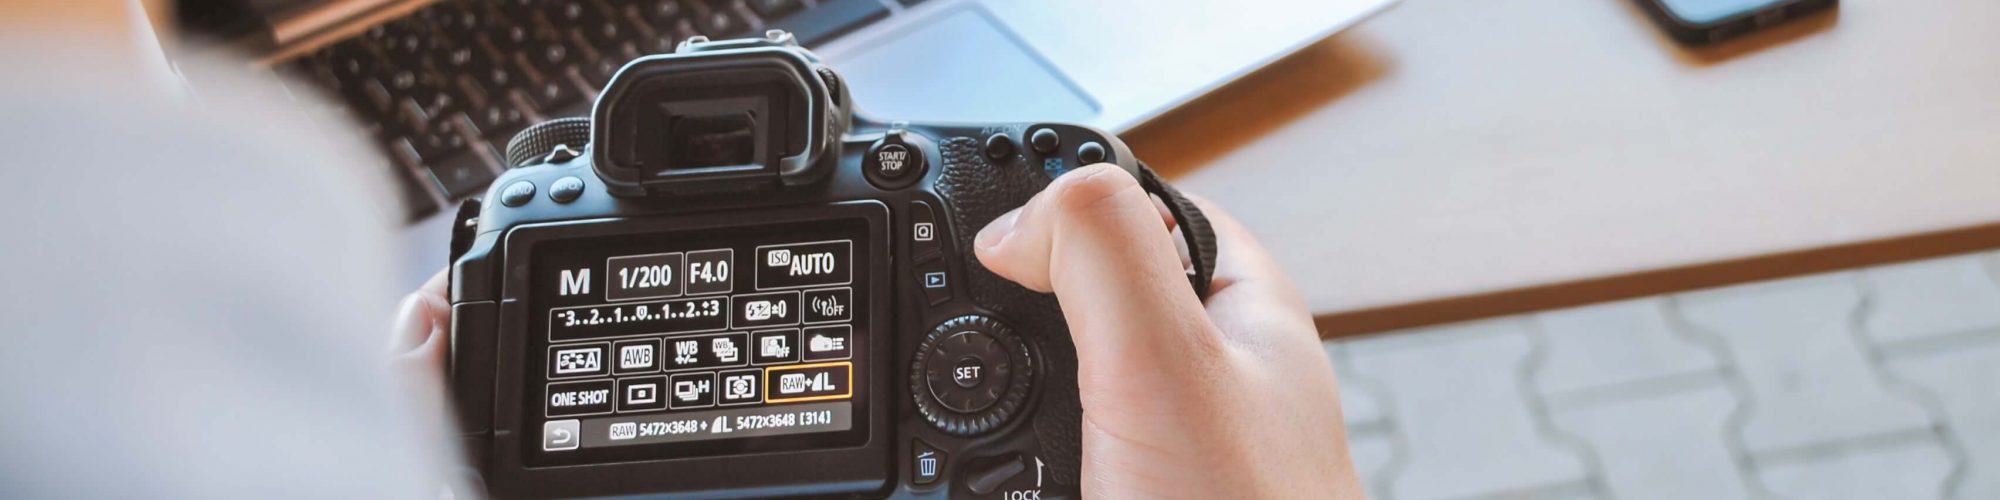 11 best sites to find freelance photography jobs